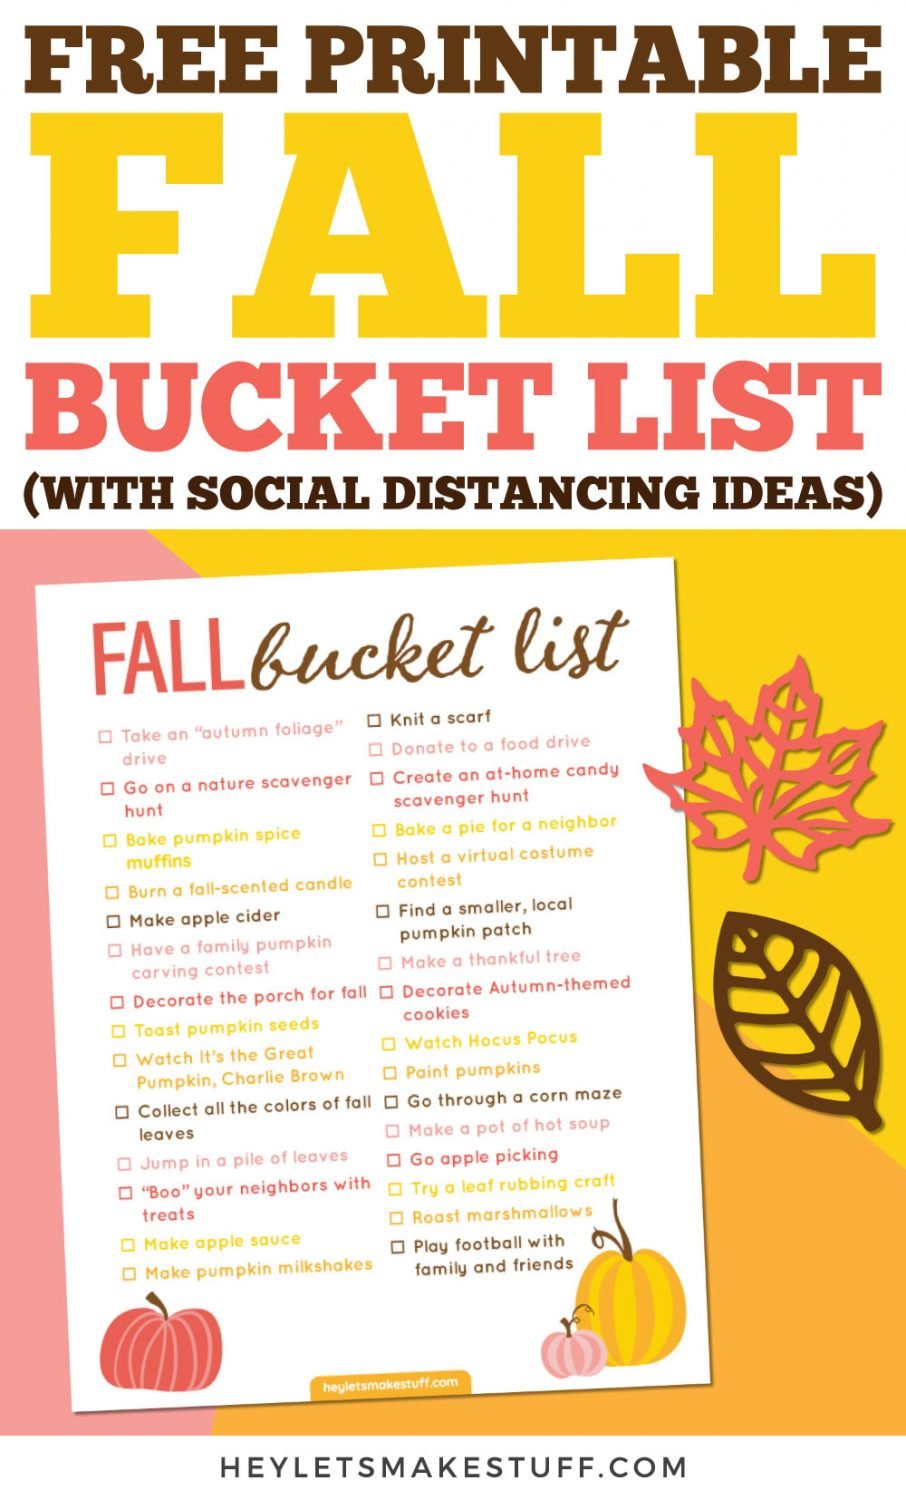 Free printable fall bucket list (with social distancing ideas) pin image